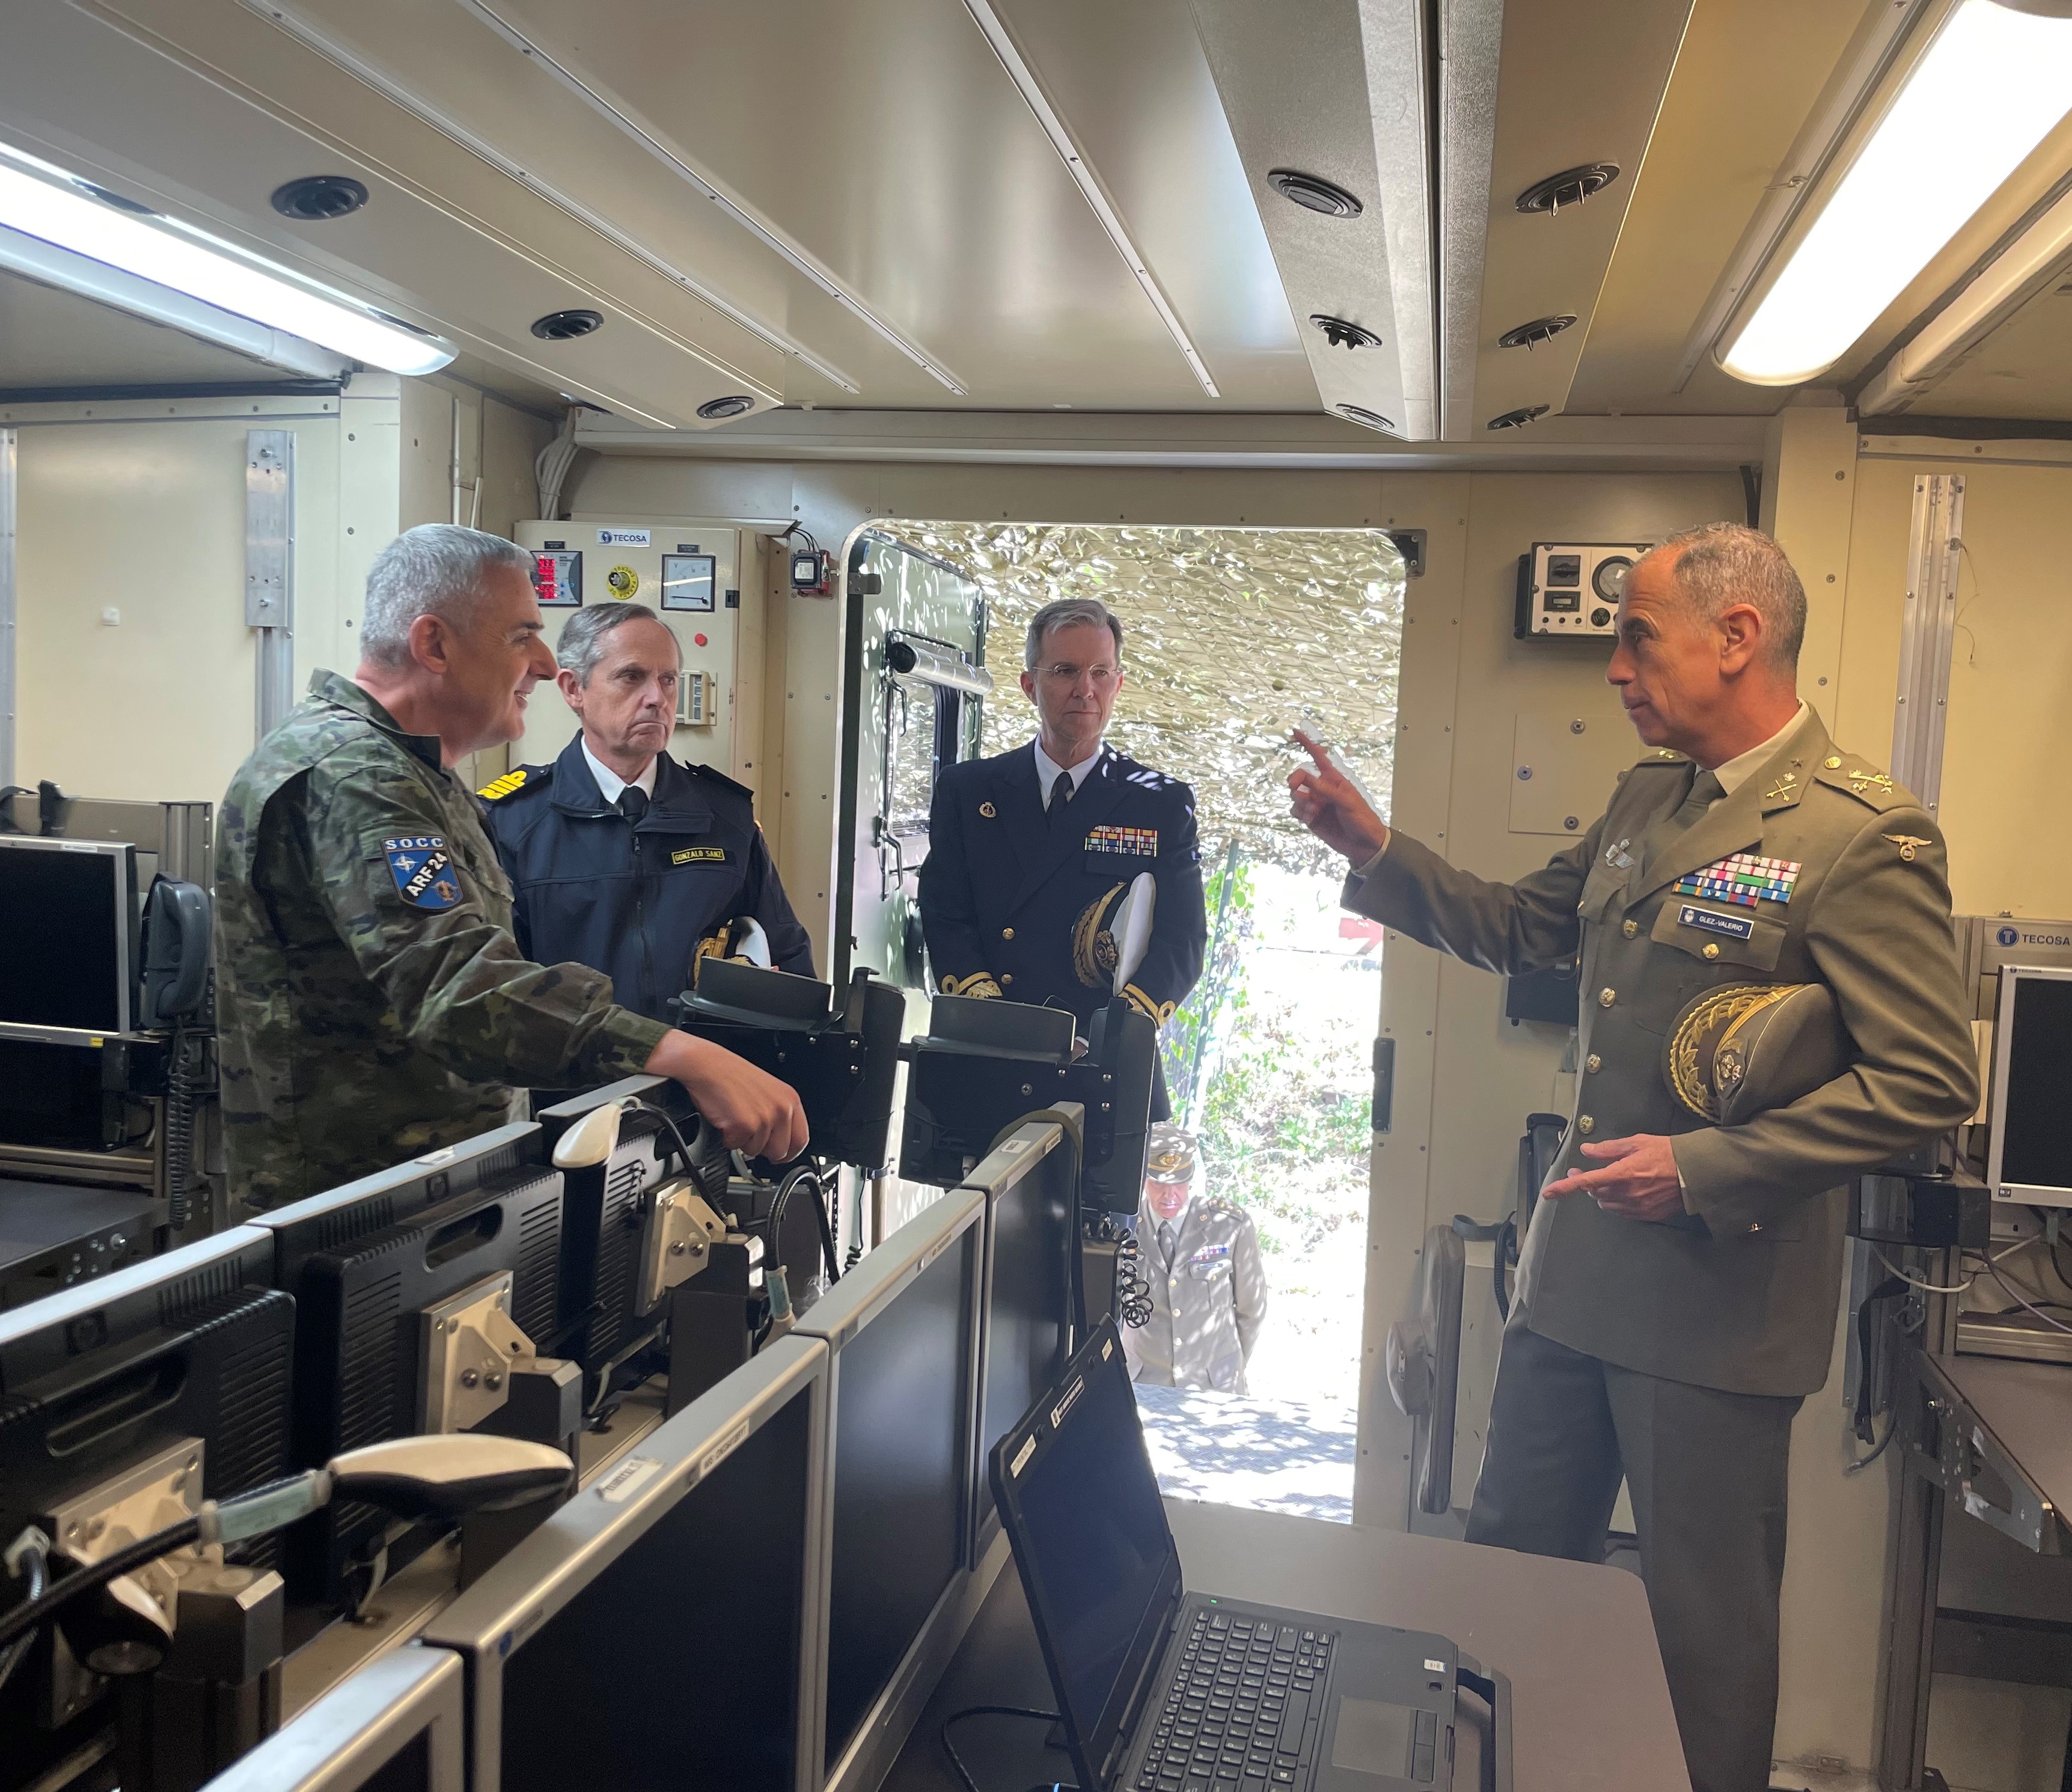 Chairman of the Joint Chiefs of Staff visits the forward command post